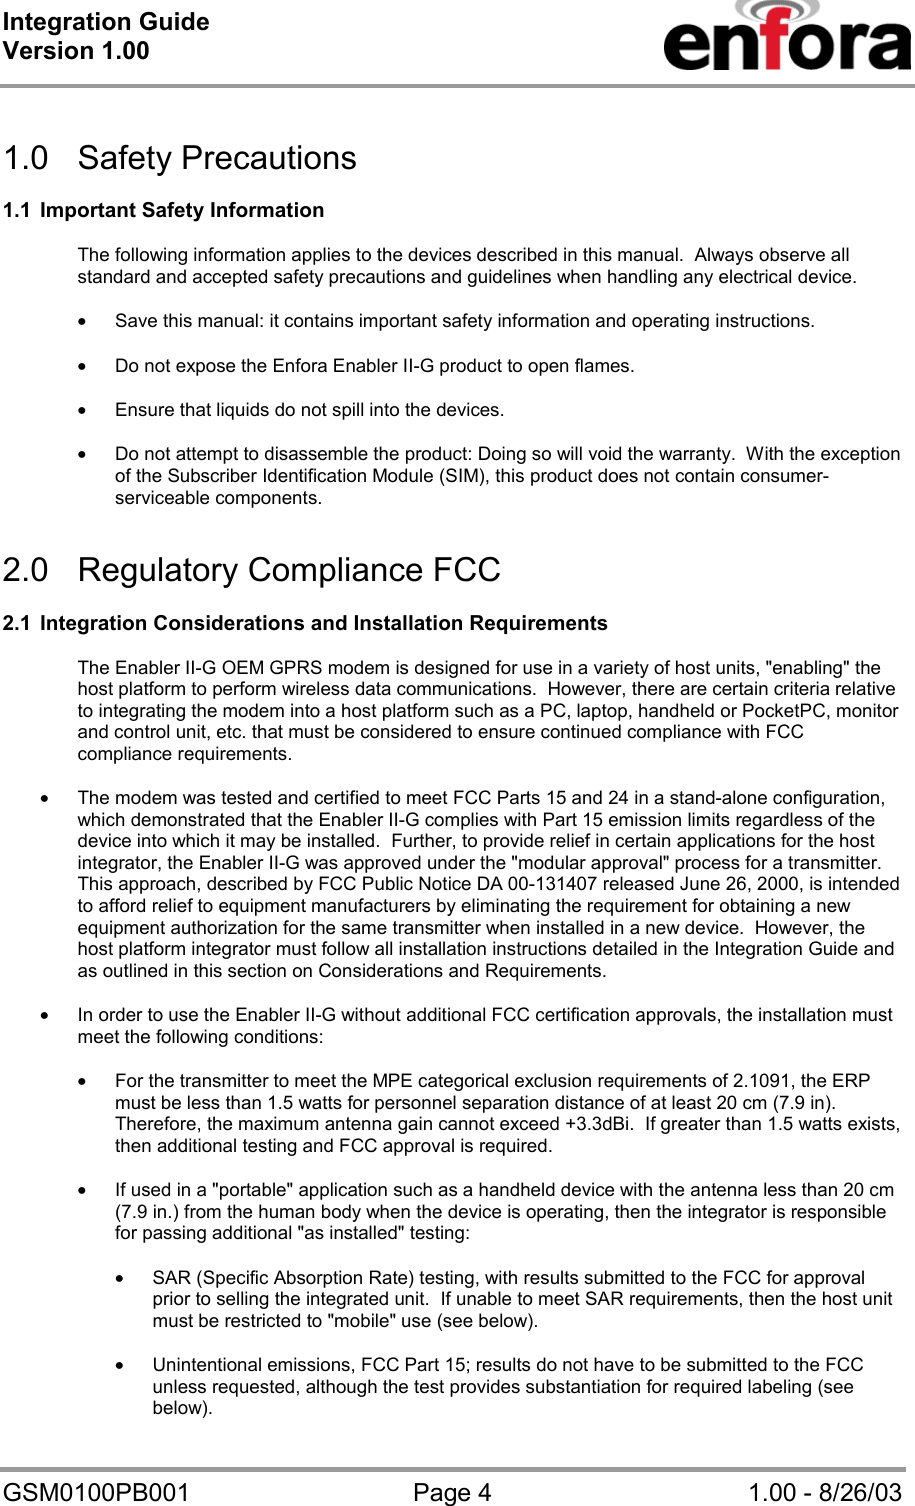 Integration Guide  Version 1.00   GSM0100PB001  Page 4  1.00 - 8/26/03  1.0 Safety Precautions  1.1  Important Safety Information  The following information applies to the devices described in this manual.  Always observe all standard and accepted safety precautions and guidelines when handling any electrical device.  • Save this manual: it contains important safety information and operating instructions.  • Do not expose the Enfora Enabler II-G product to open flames.  • Ensure that liquids do not spill into the devices.  • Do not attempt to disassemble the product: Doing so will void the warranty.  With the exception of the Subscriber Identification Module (SIM), this product does not contain consumer-serviceable components.   2.0  Regulatory Compliance FCC   2.1  Integration Considerations and Installation Requirements  The Enabler II-G OEM GPRS modem is designed for use in a variety of host units, &quot;enabling&quot; the host platform to perform wireless data communications.  However, there are certain criteria relative to integrating the modem into a host platform such as a PC, laptop, handheld or PocketPC, monitor and control unit, etc. that must be considered to ensure continued compliance with FCC compliance requirements.  • The modem was tested and certified to meet FCC Parts 15 and 24 in a stand-alone configuration, which demonstrated that the Enabler II-G complies with Part 15 emission limits regardless of the device into which it may be installed.  Further, to provide relief in certain applications for the host integrator, the Enabler II-G was approved under the &quot;modular approval&quot; process for a transmitter.  This approach, described by FCC Public Notice DA 00-131407 released June 26, 2000, is intended to afford relief to equipment manufacturers by eliminating the requirement for obtaining a new equipment authorization for the same transmitter when installed in a new device.  However, the host platform integrator must follow all installation instructions detailed in the Integration Guide and as outlined in this section on Considerations and Requirements.  • In order to use the Enabler II-G without additional FCC certification approvals, the installation must meet the following conditions:  • For the transmitter to meet the MPE categorical exclusion requirements of 2.1091, the ERP must be less than 1.5 watts for personnel separation distance of at least 20 cm (7.9 in).  Therefore, the maximum antenna gain cannot exceed +3.3dBi.  If greater than 1.5 watts exists, then additional testing and FCC approval is required.  • If used in a &quot;portable&quot; application such as a handheld device with the antenna less than 20 cm (7.9 in.) from the human body when the device is operating, then the integrator is responsible for passing additional &quot;as installed&quot; testing:  • SAR (Specific Absorption Rate) testing, with results submitted to the FCC for approval prior to selling the integrated unit.  If unable to meet SAR requirements, then the host unit must be restricted to &quot;mobile&quot; use (see below).  • Unintentional emissions, FCC Part 15; results do not have to be submitted to the FCC unless requested, although the test provides substantiation for required labeling (see below). 